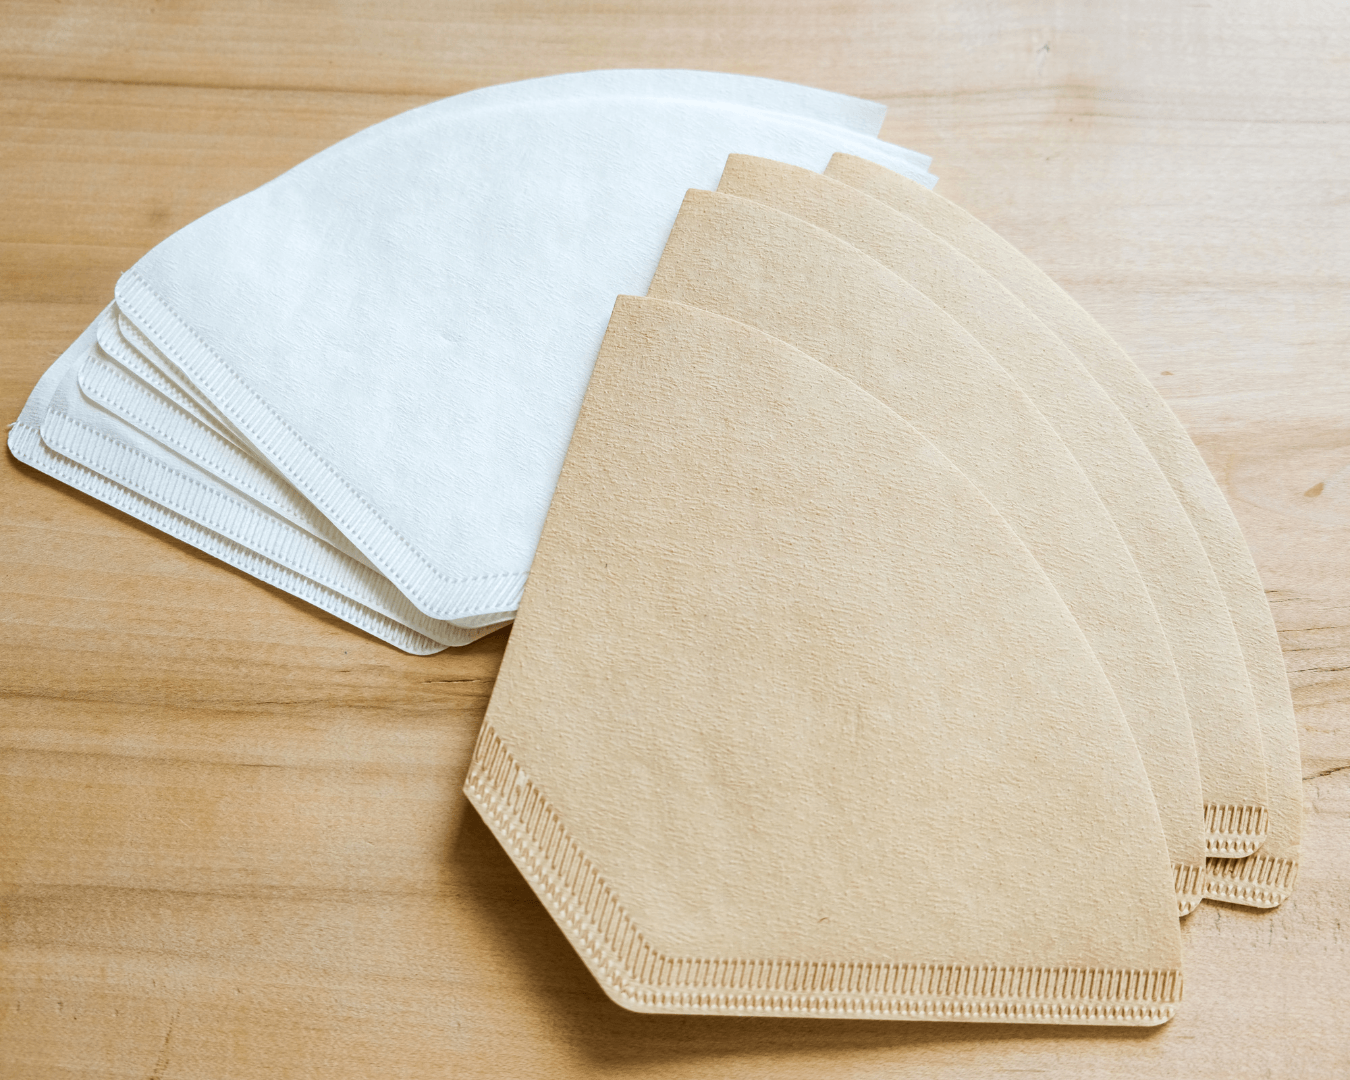 Difference Between Paper and Permanent Coffee Filters